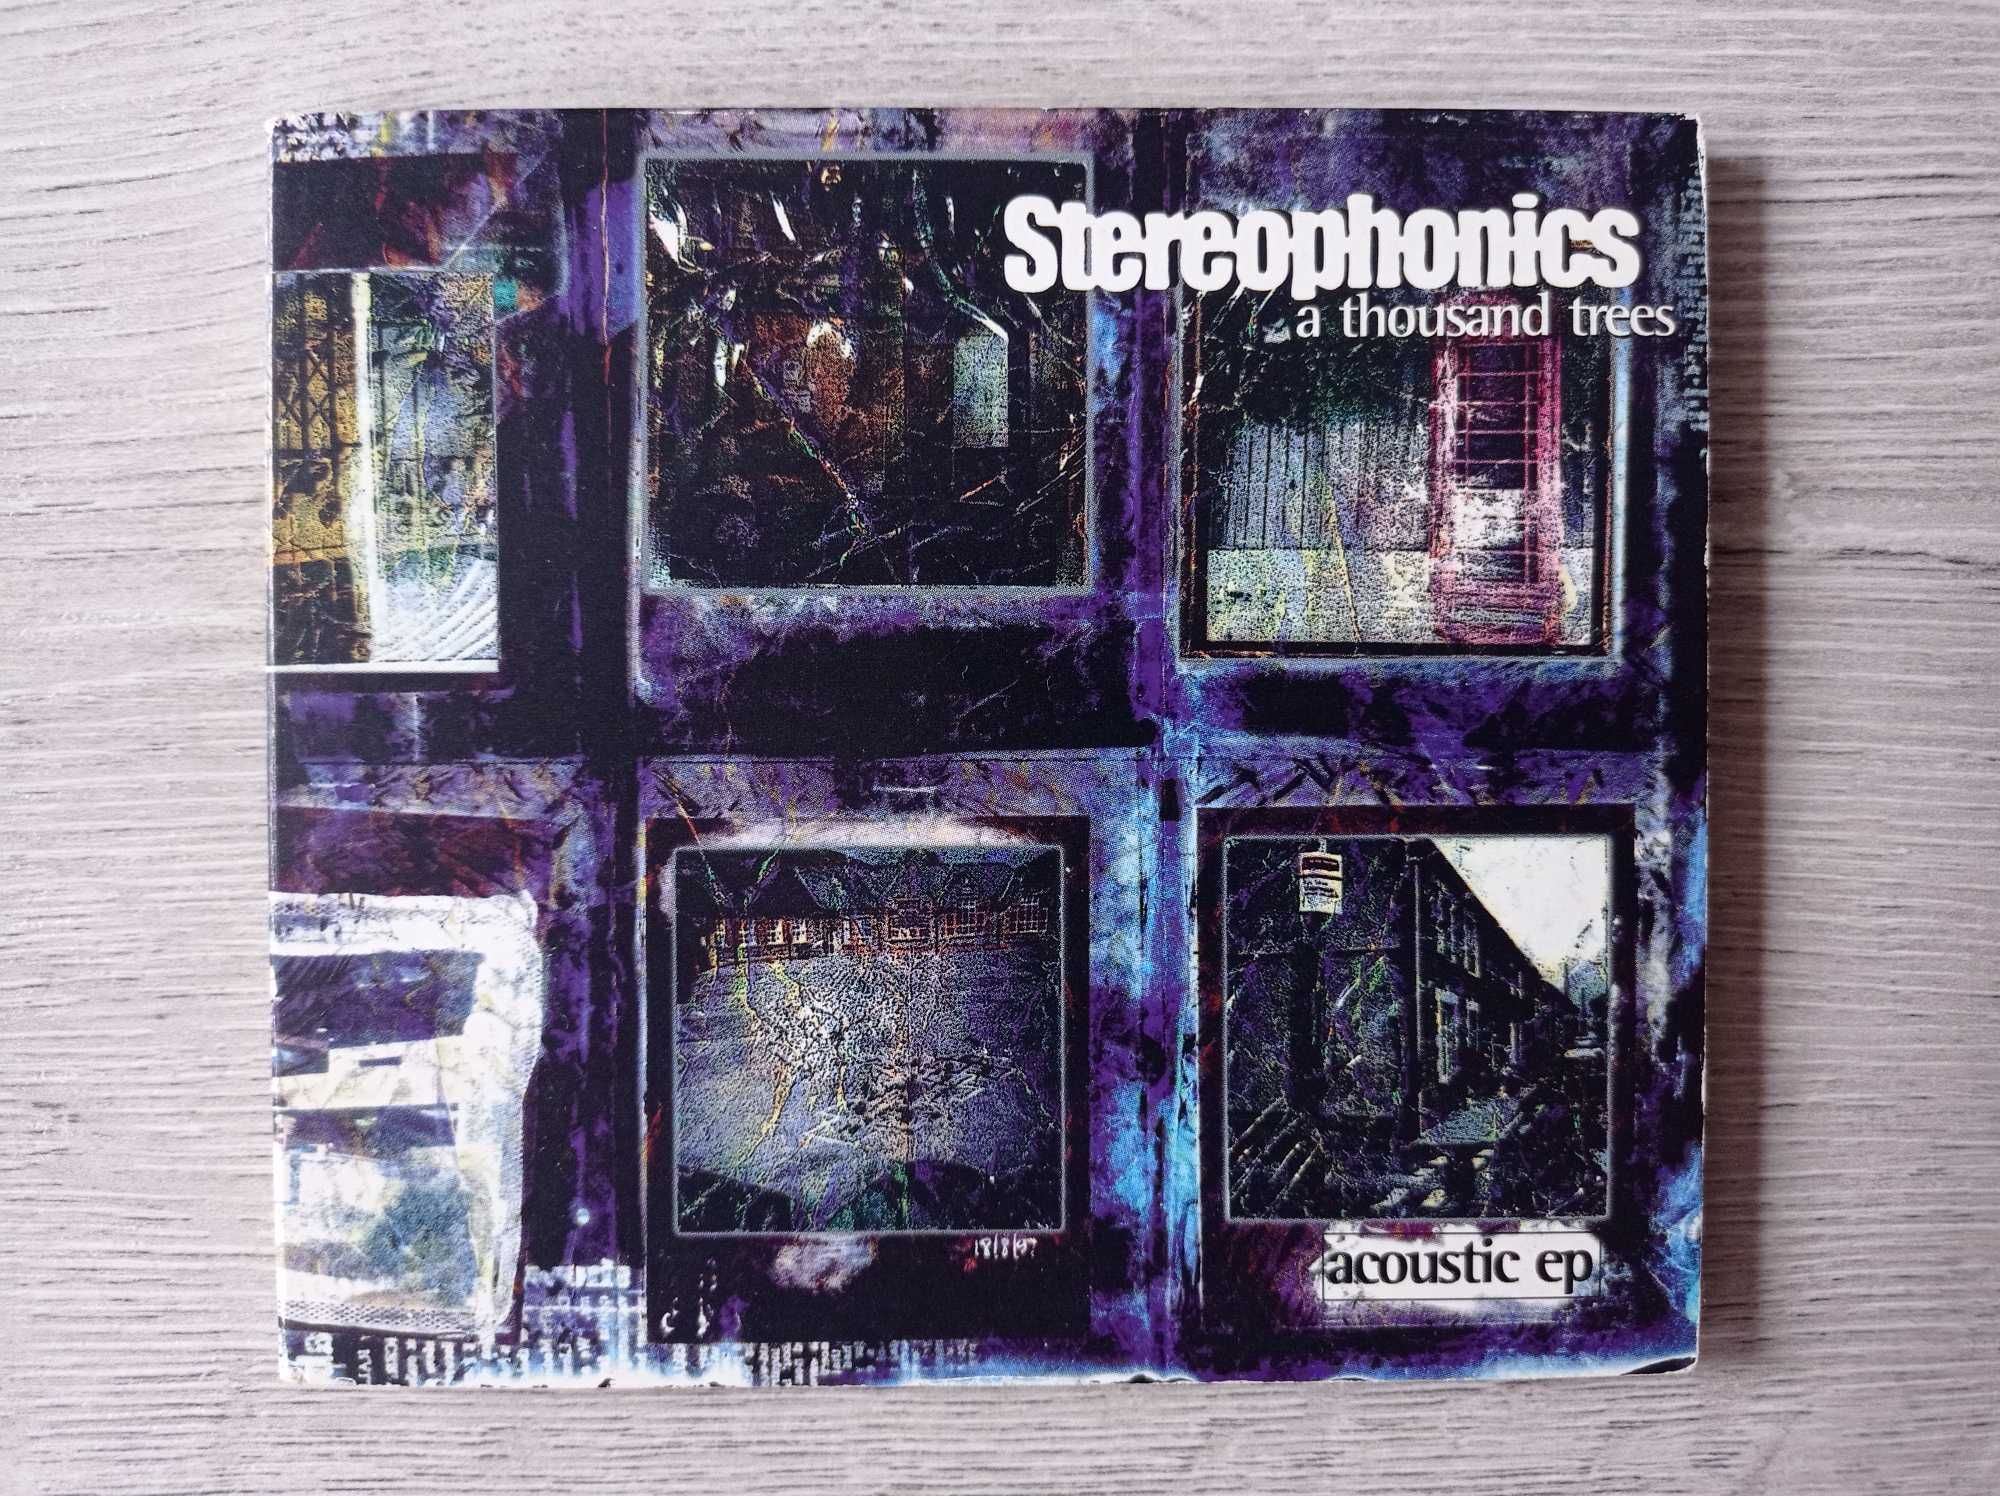 Stereophonics – A Thousand Trees – Acoustic EP - cd - wyprzedaż